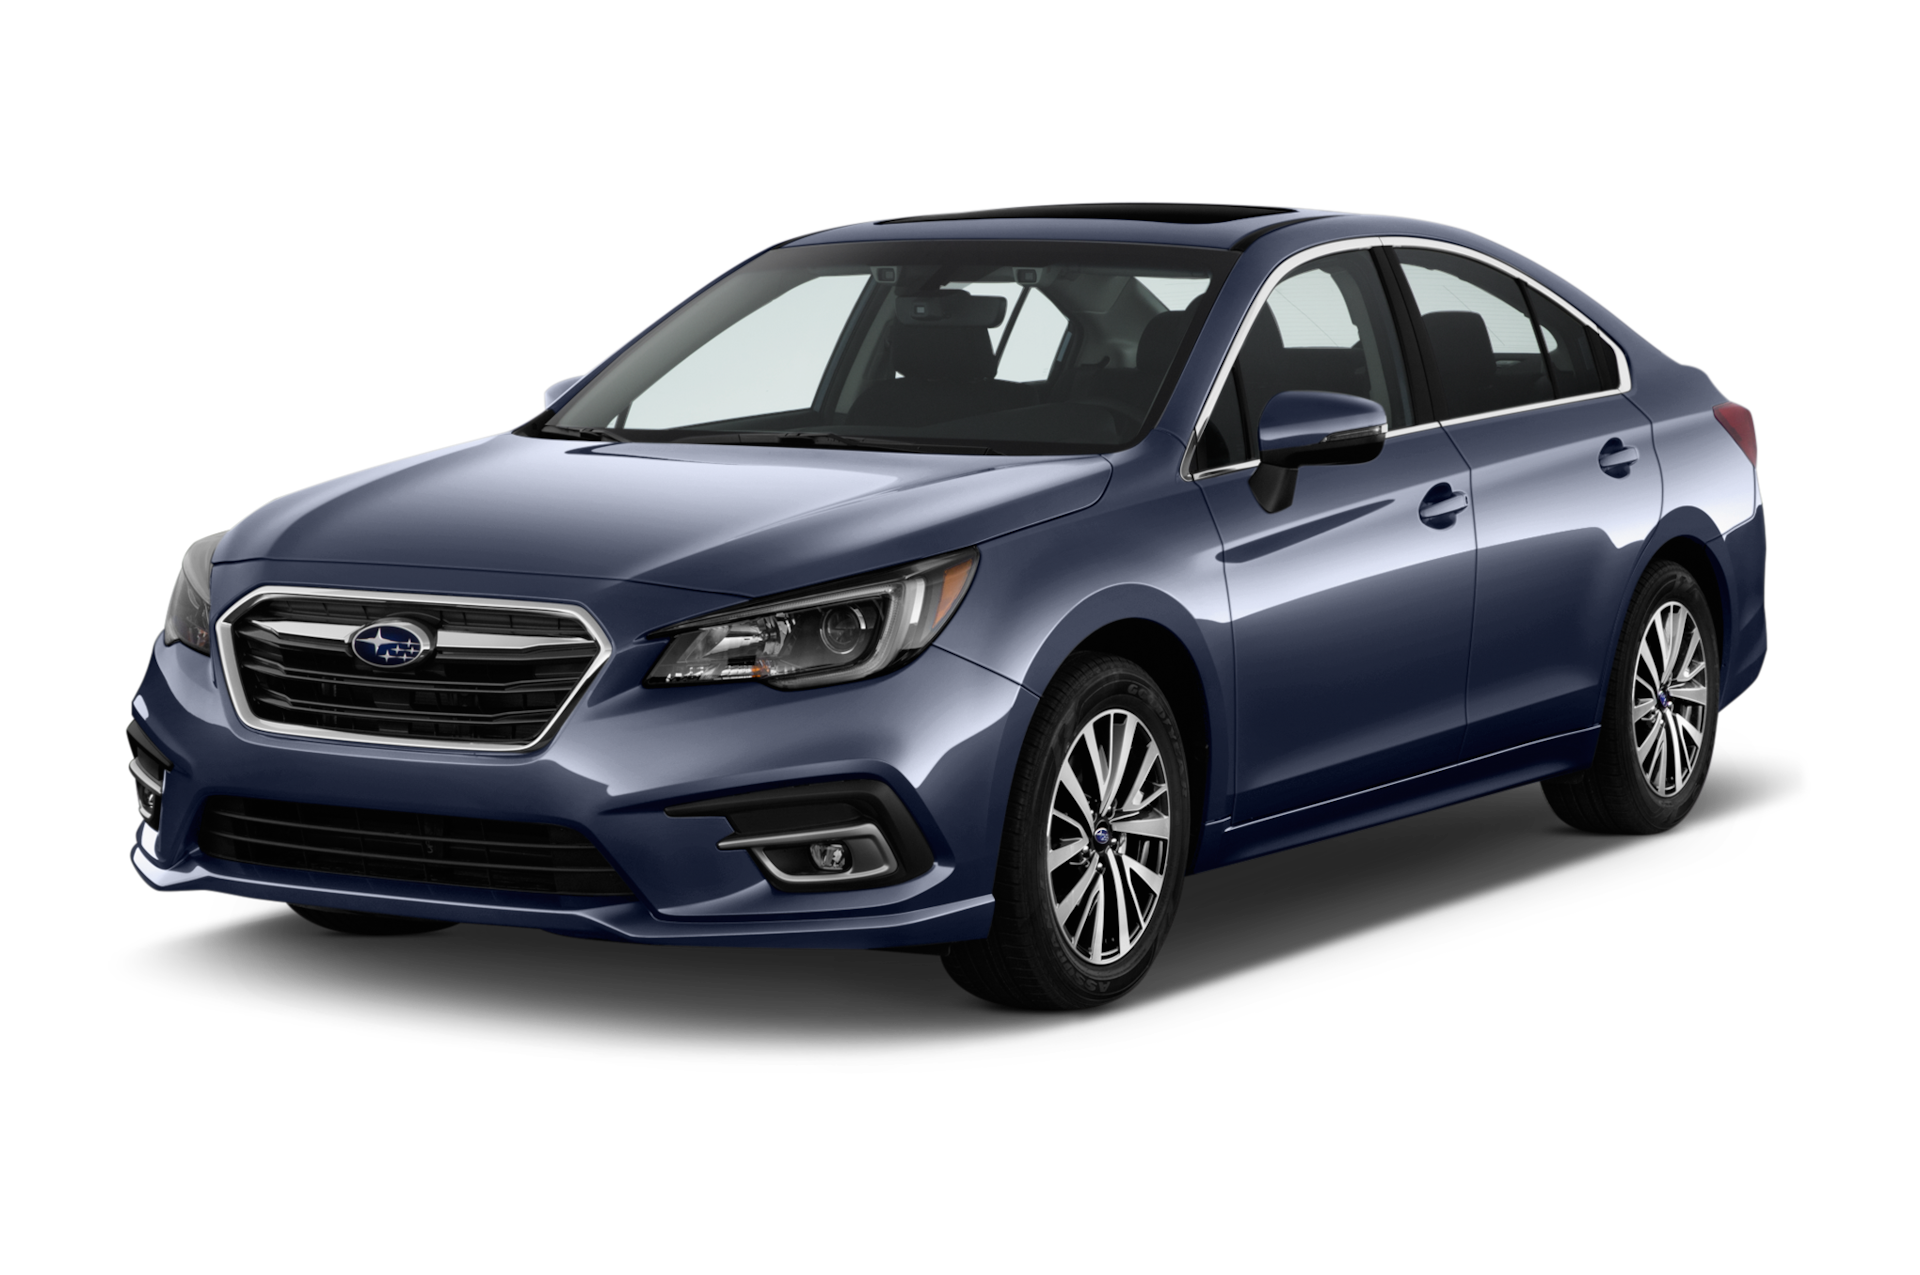 2019 Subaru Legacy Prices, Reviews, and Photos - MotorTrend